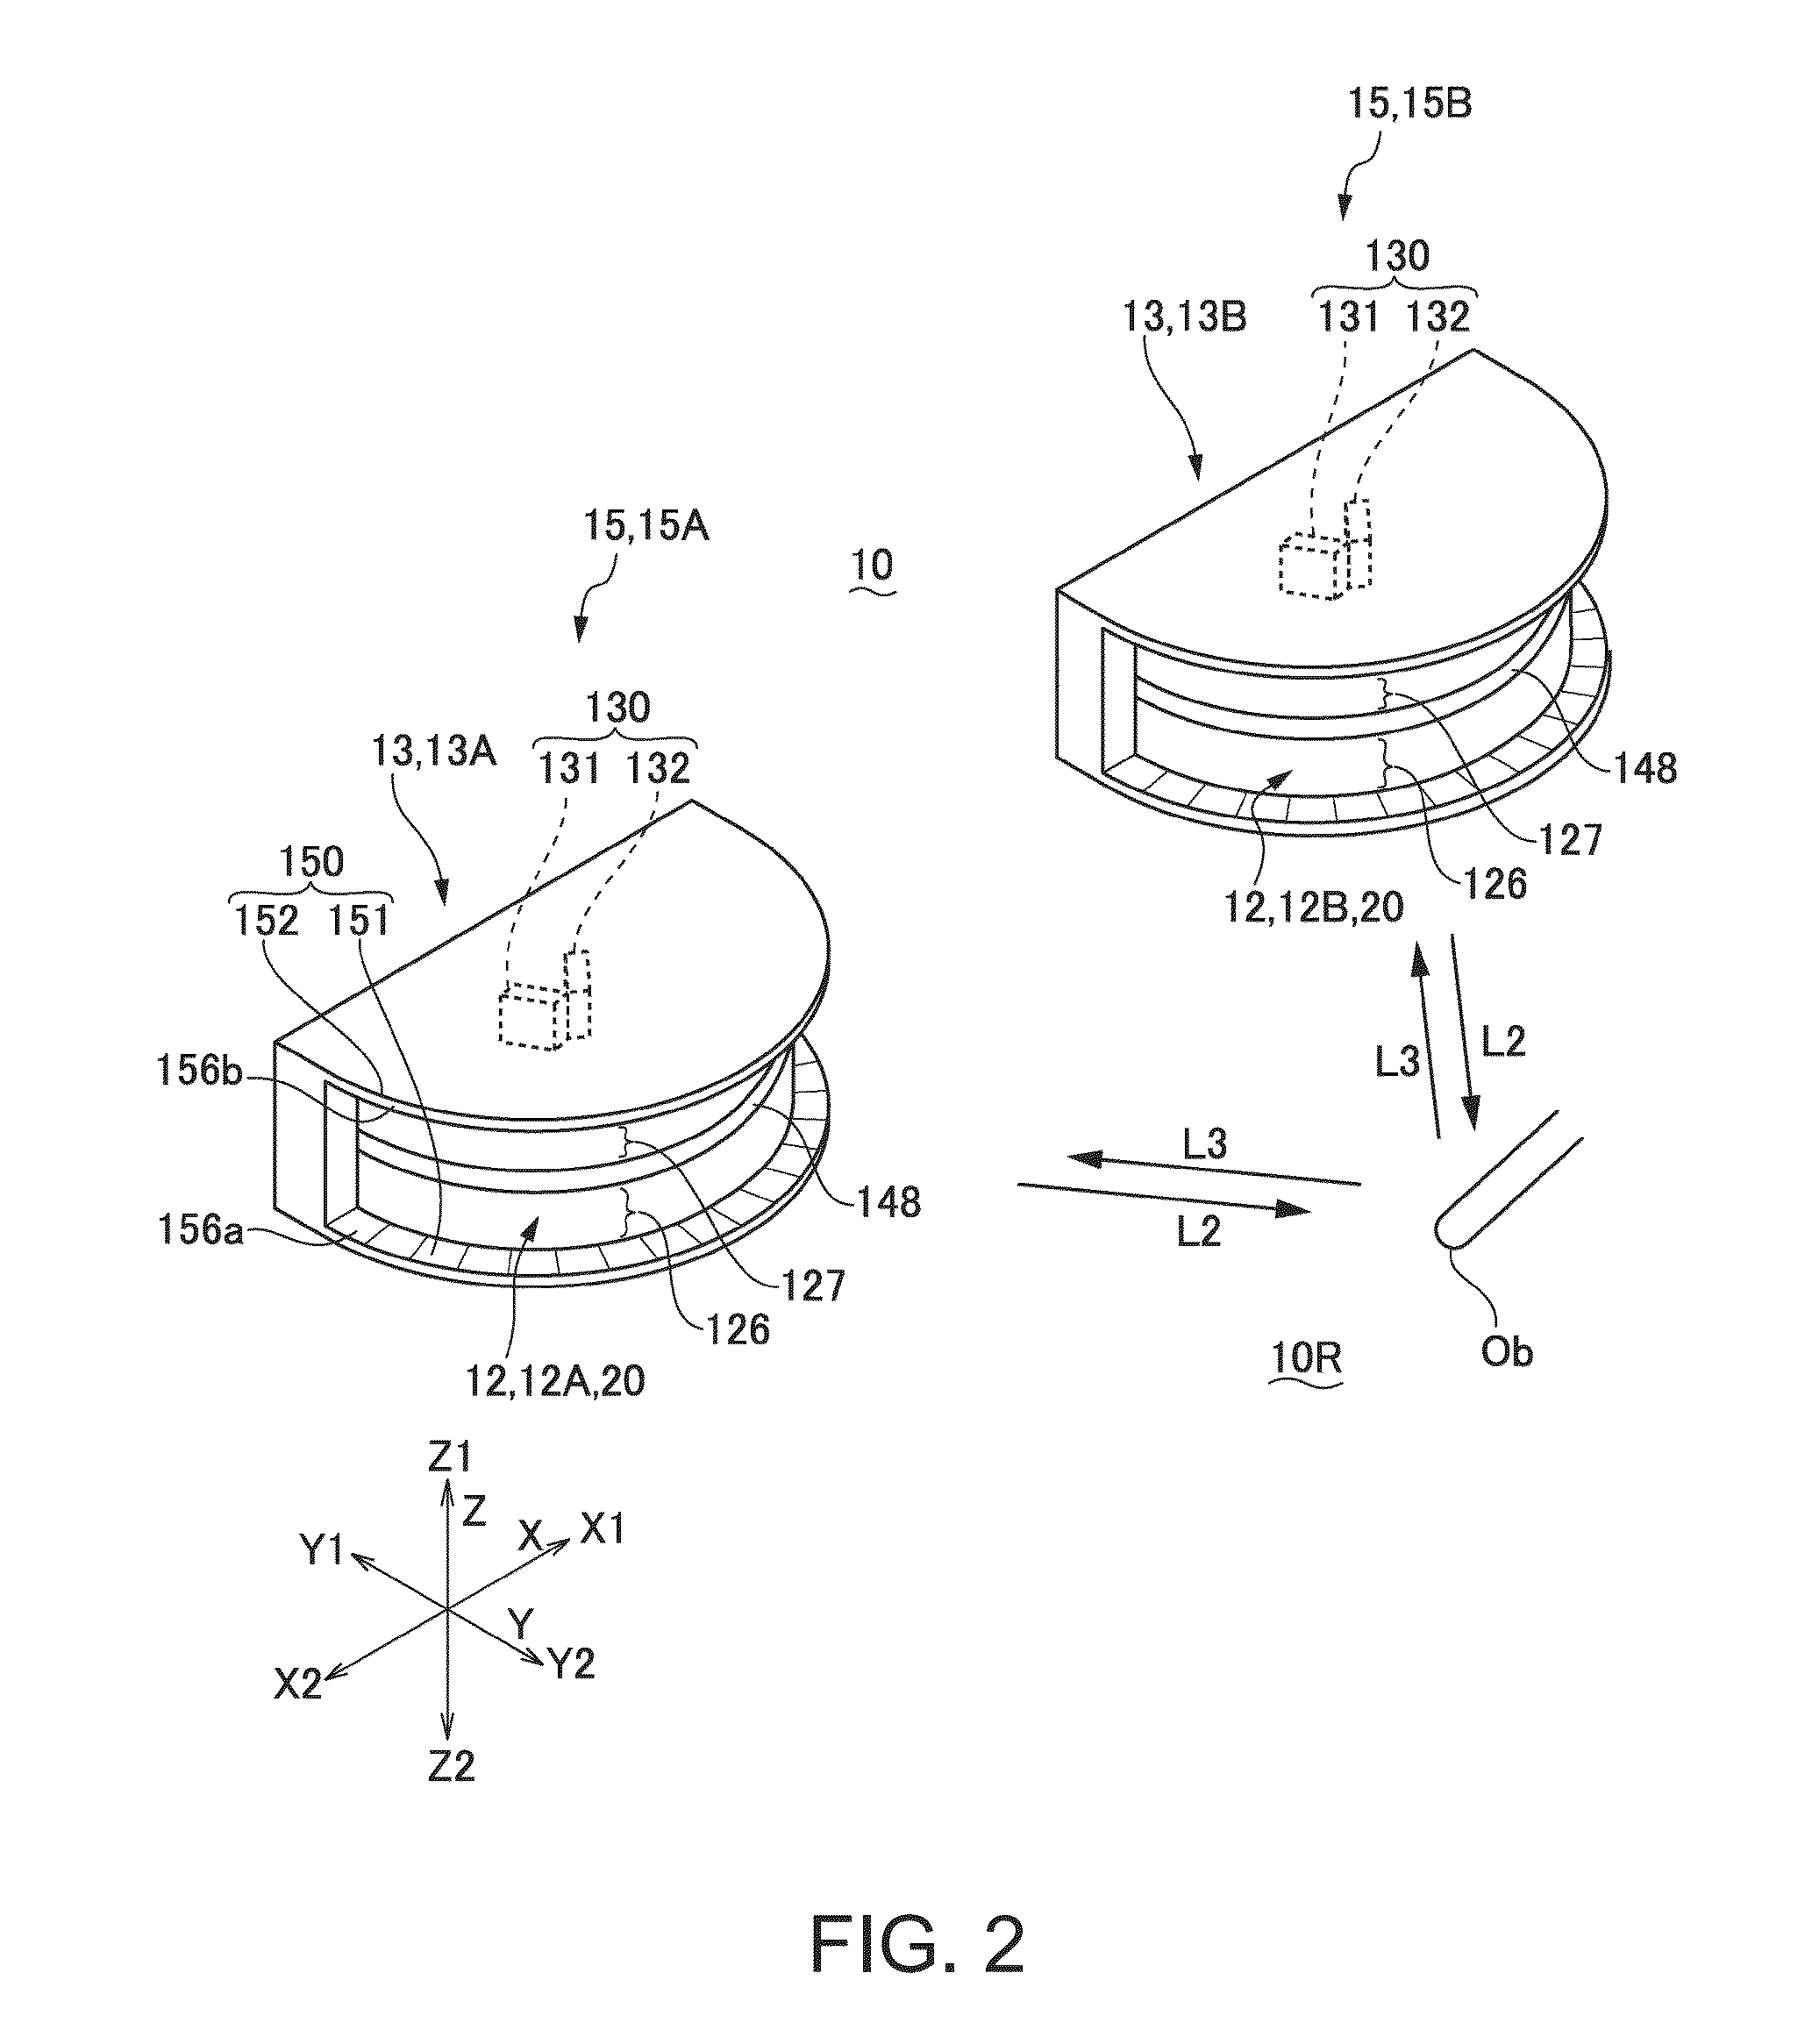 Optical position detection device and display system with input function